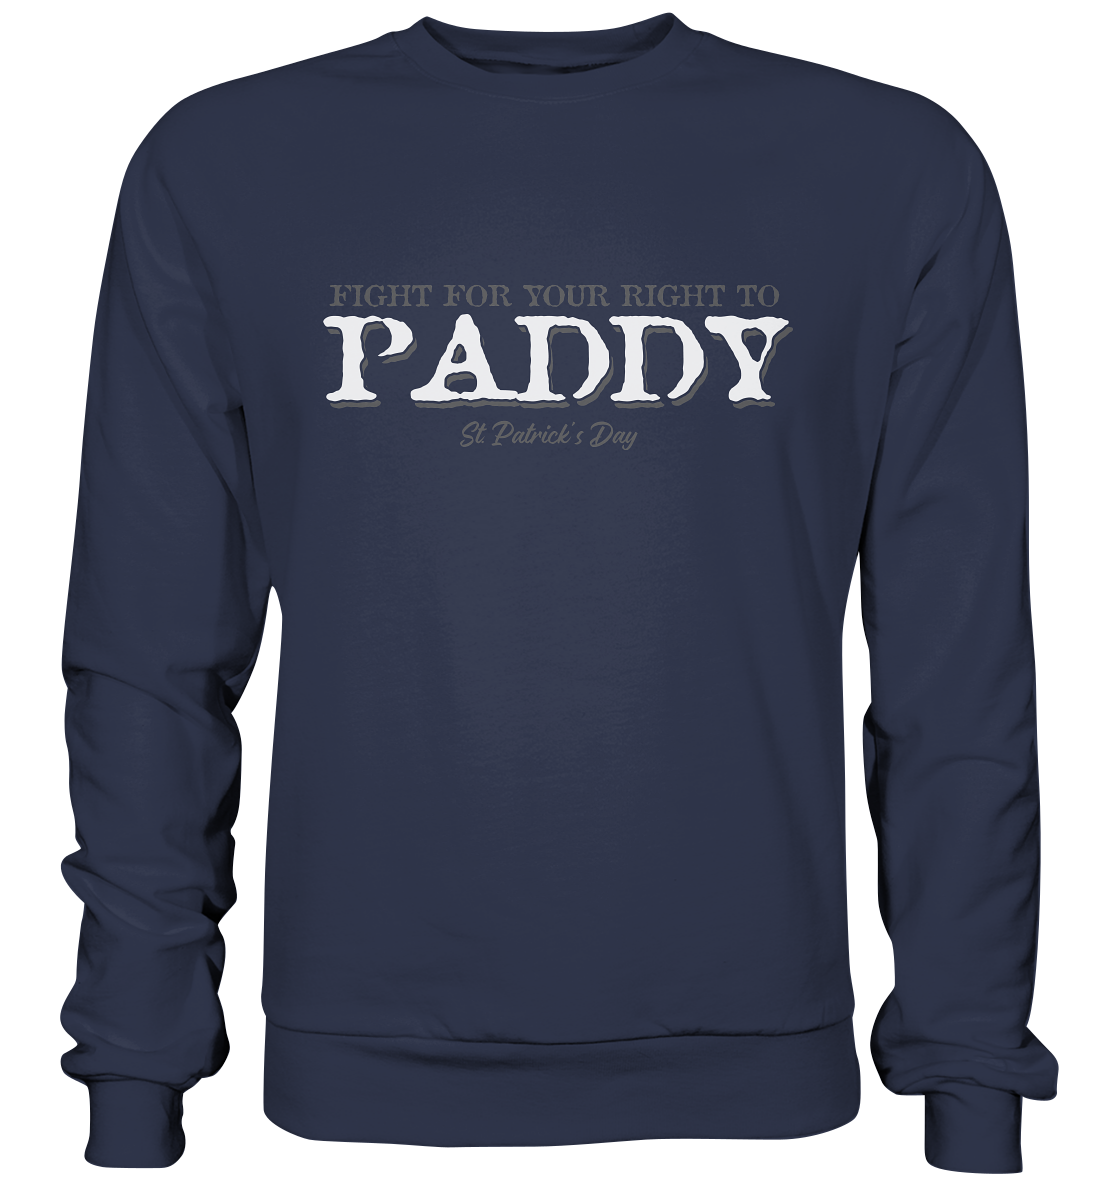 Fight For Your Right To Paddy - Premium Sweatshirt